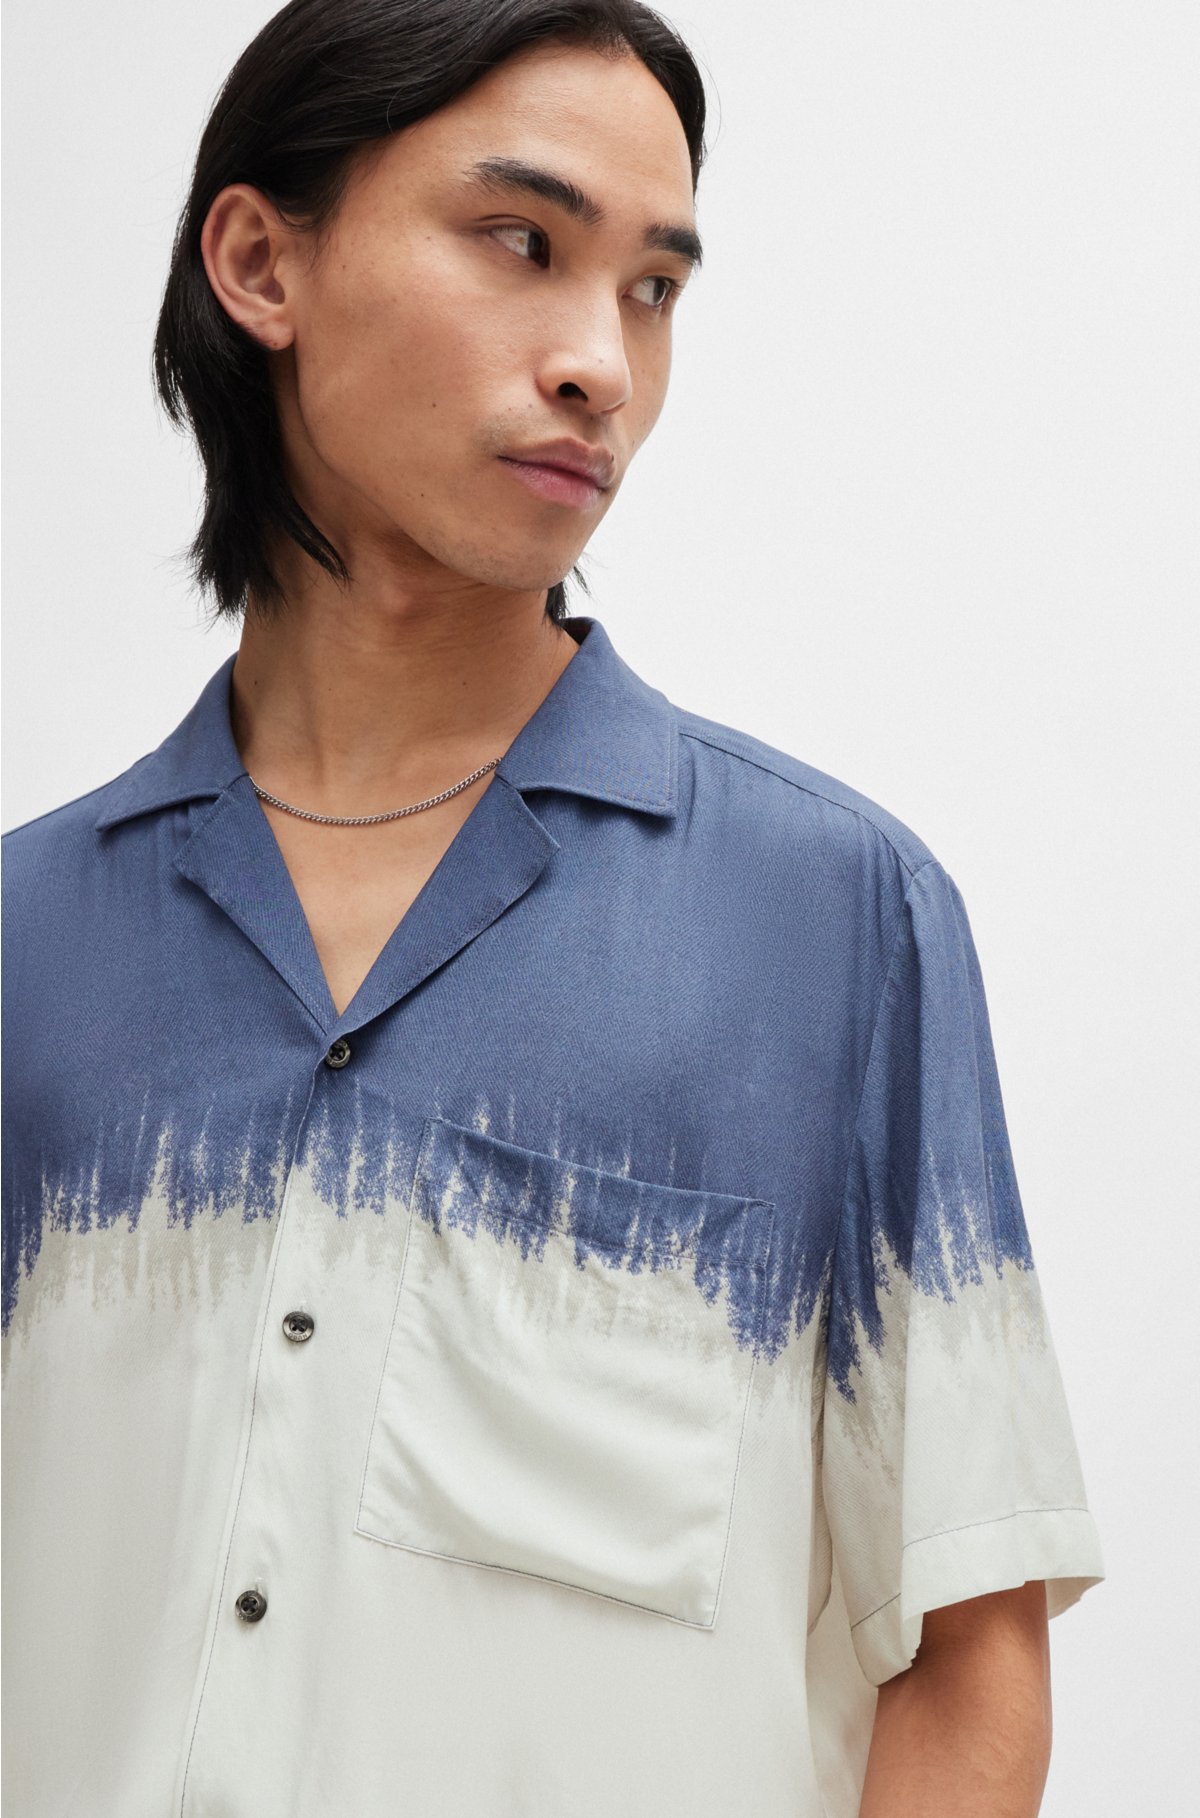 Relaxed-fit shirt with abstract print, White / Blue / Grey